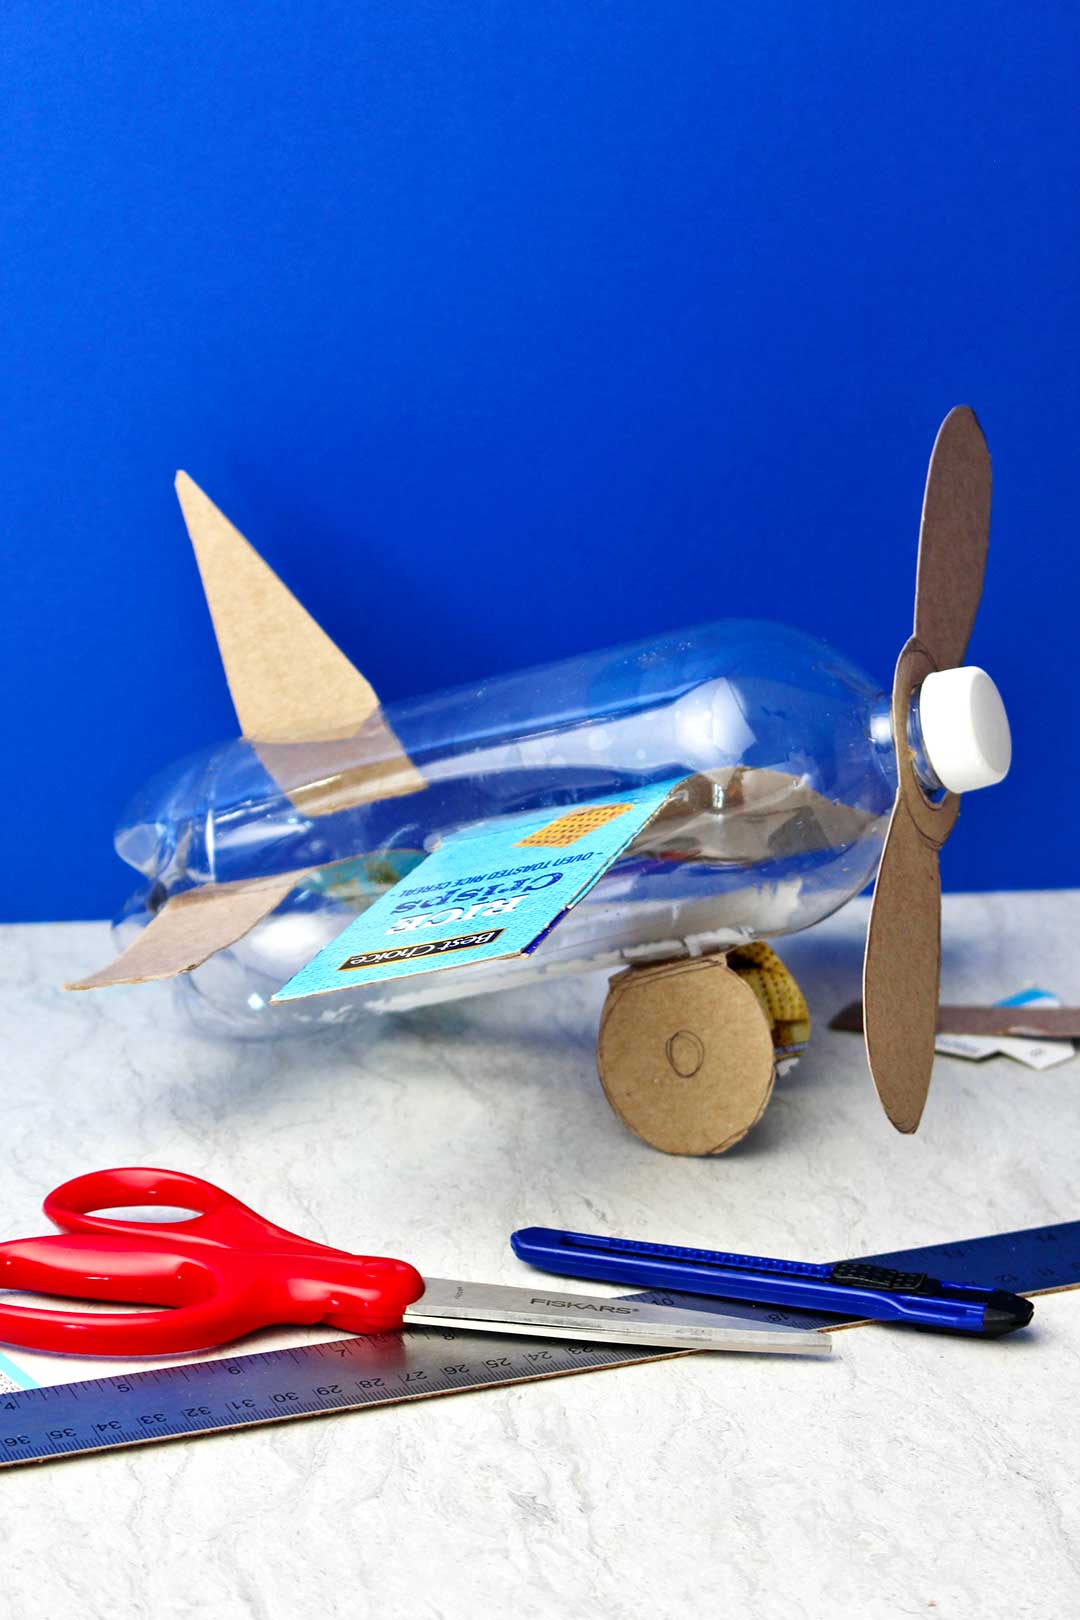 Completed bottle airplane before spray painting against a blue backdrop.